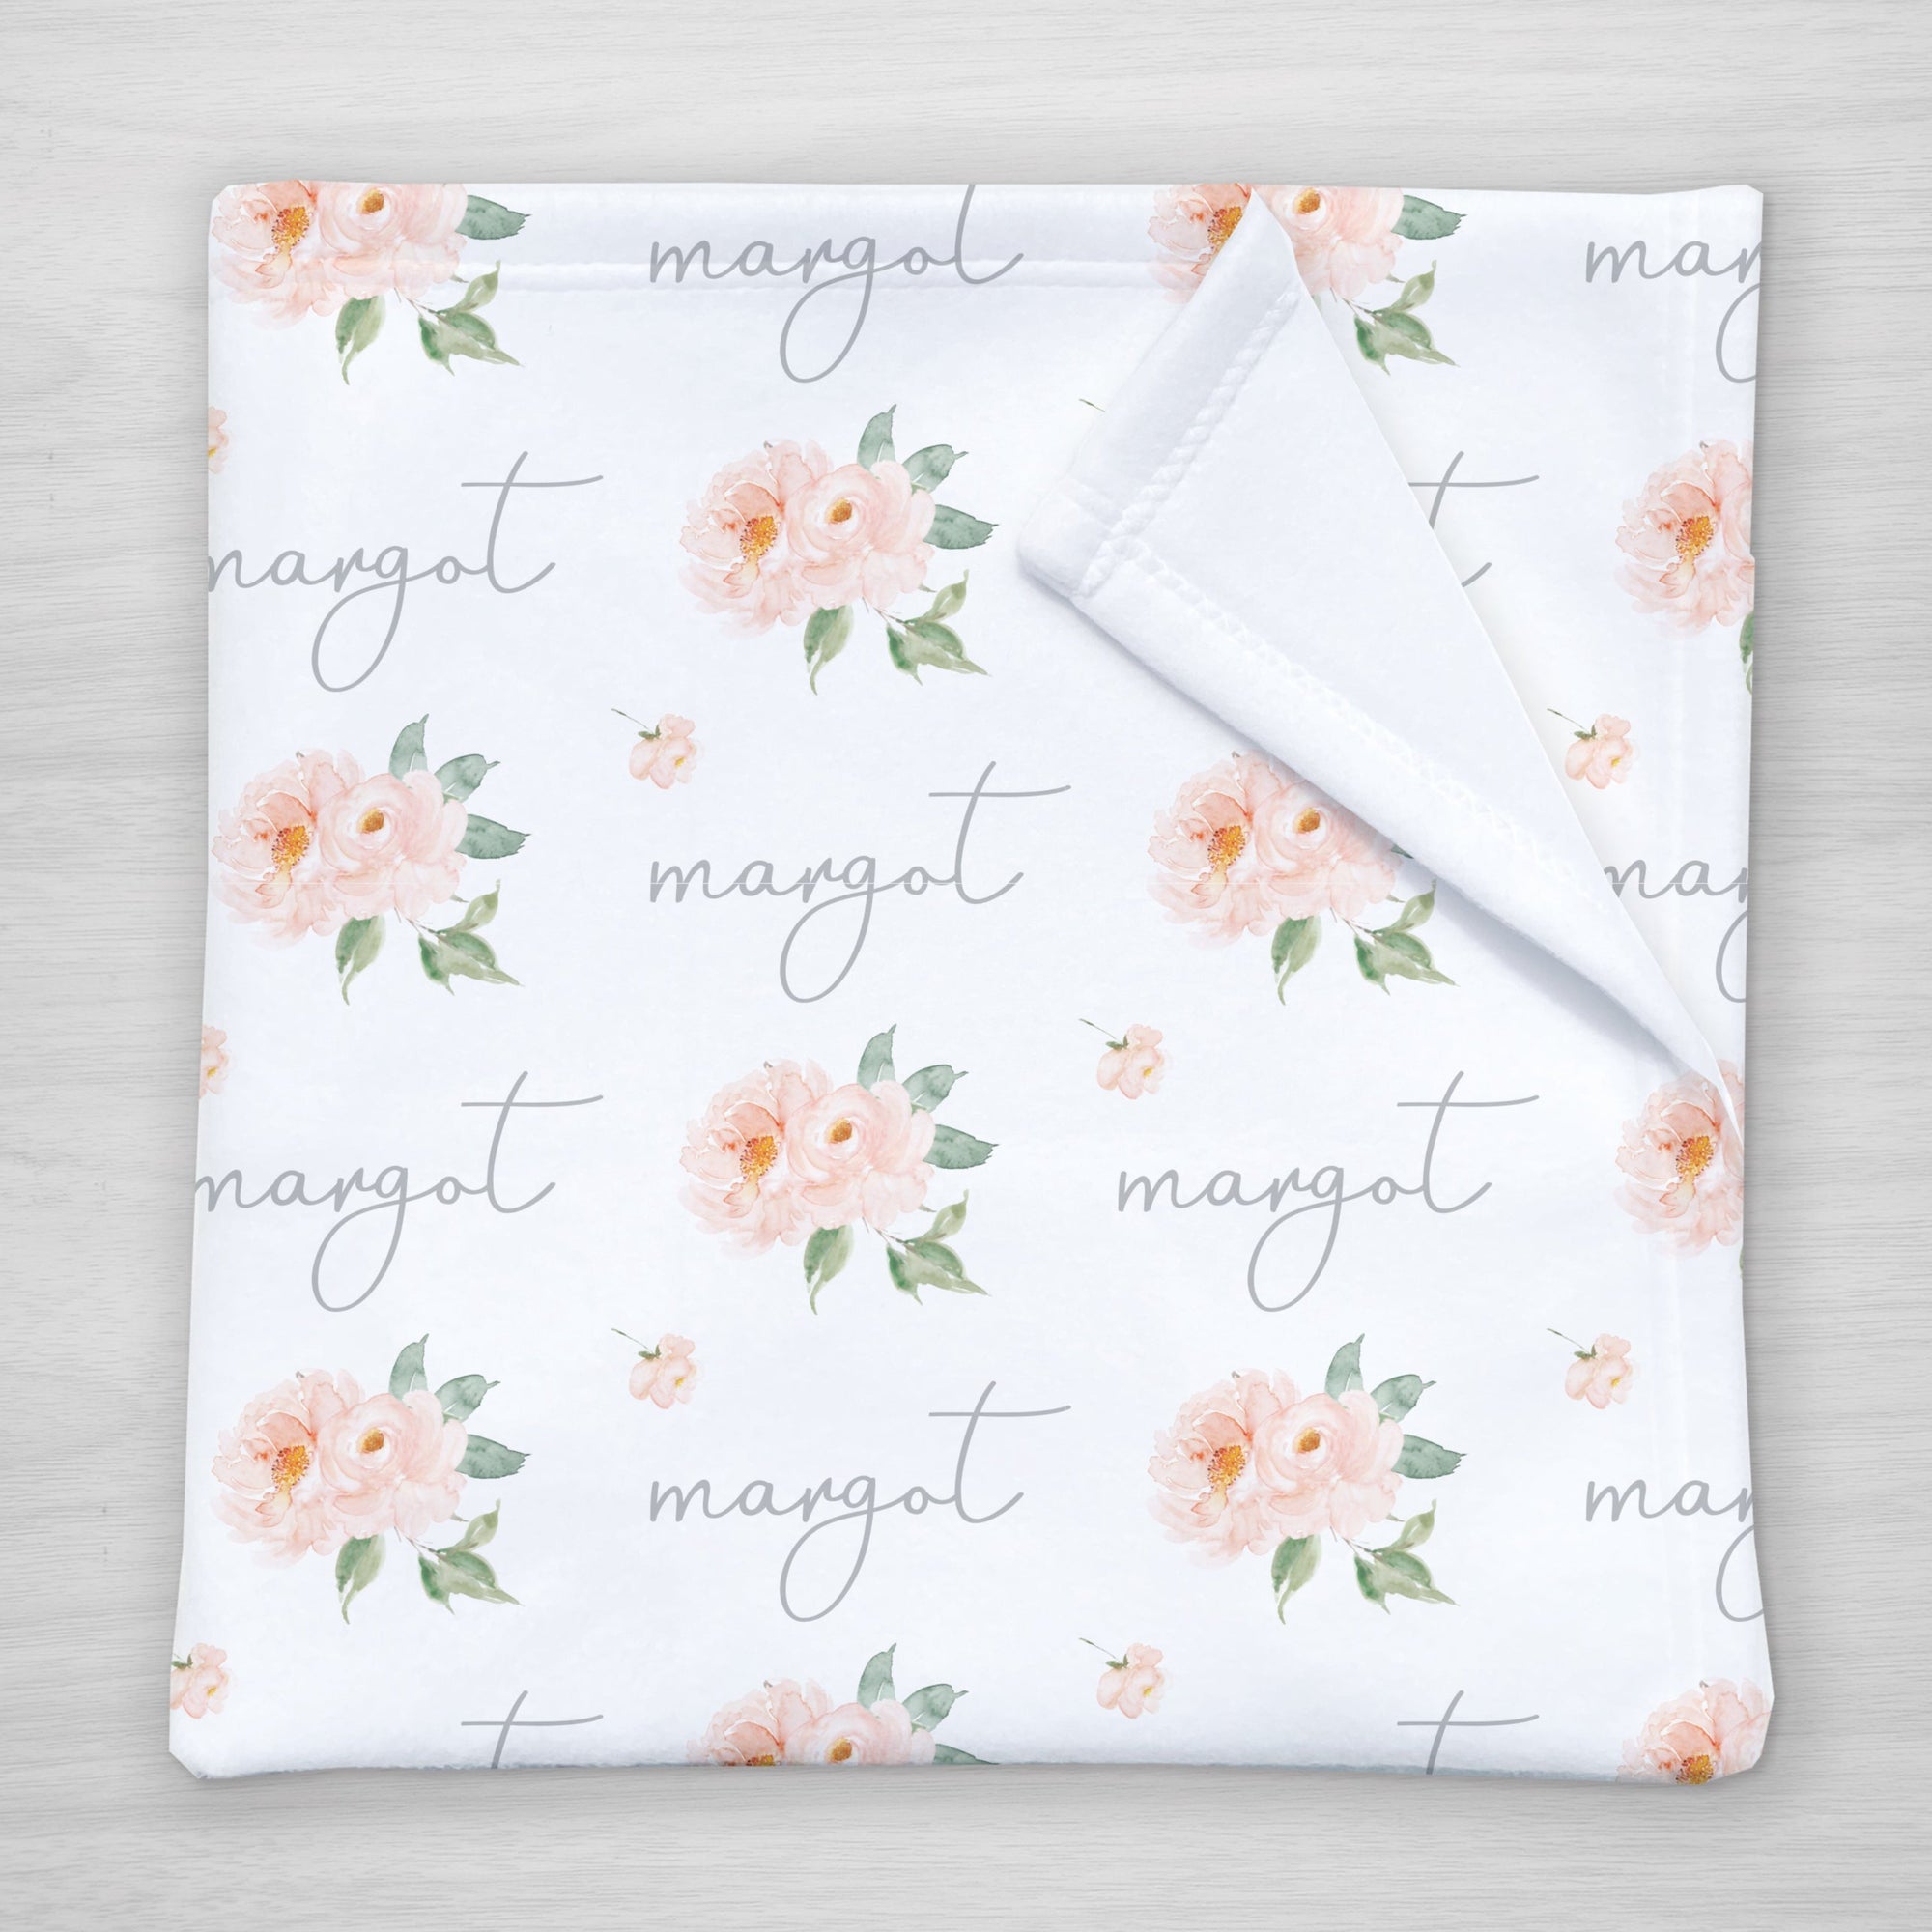 Blush Roses make the perfect accent for this personalized baby swaddle blanket | Pipsy.com